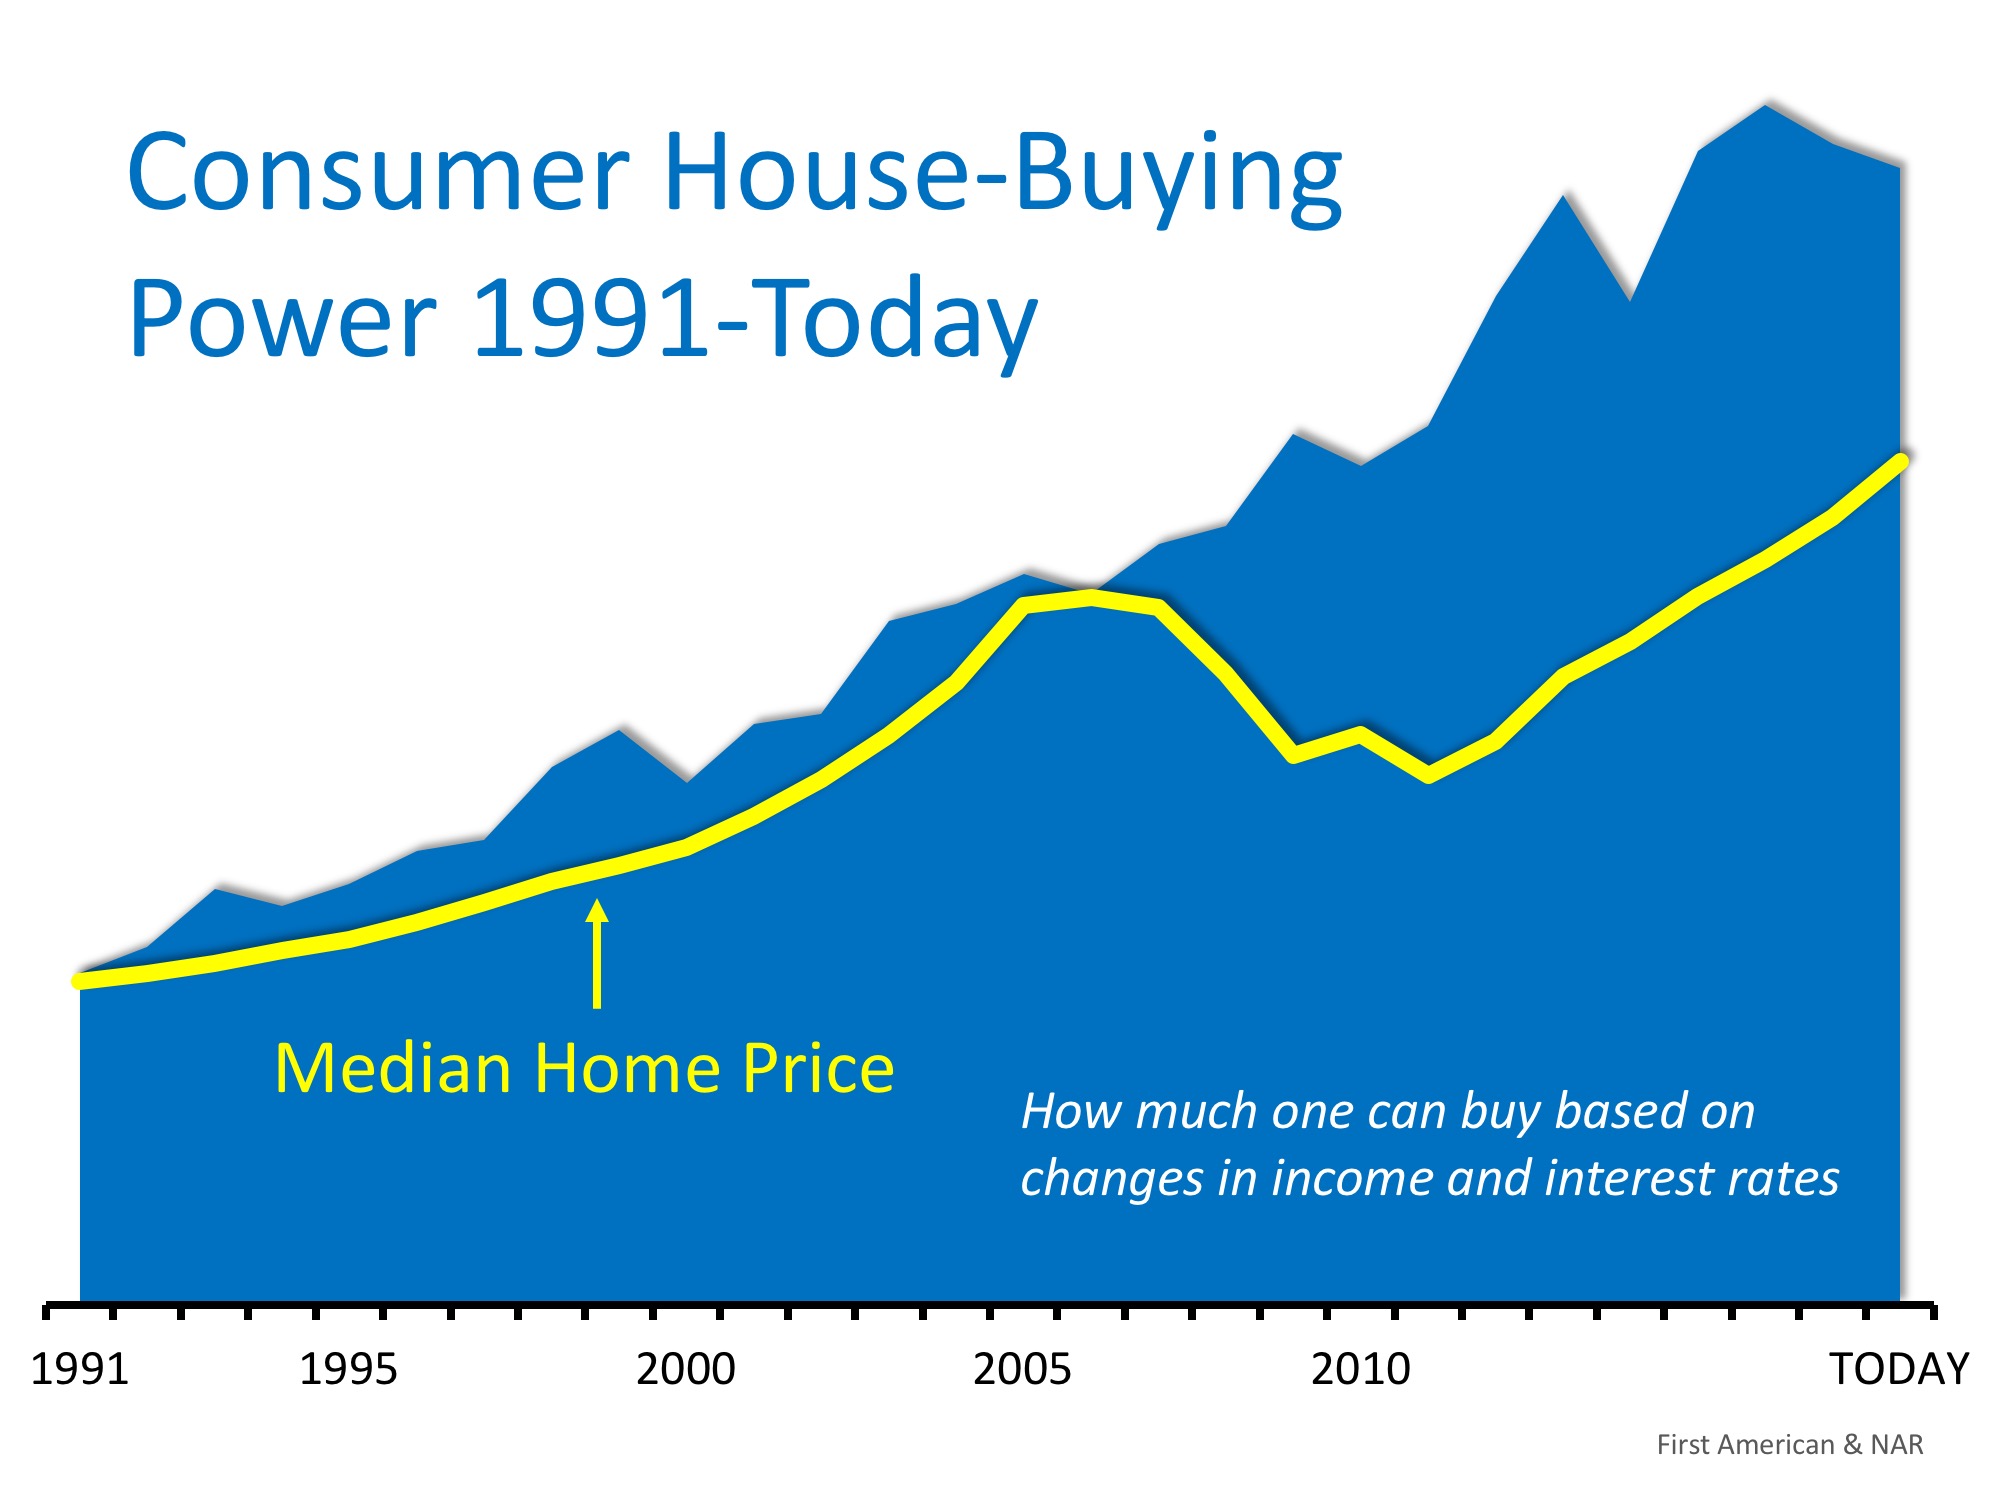 House-Buying Power at Near-Historic Levels | Simplifying The Market